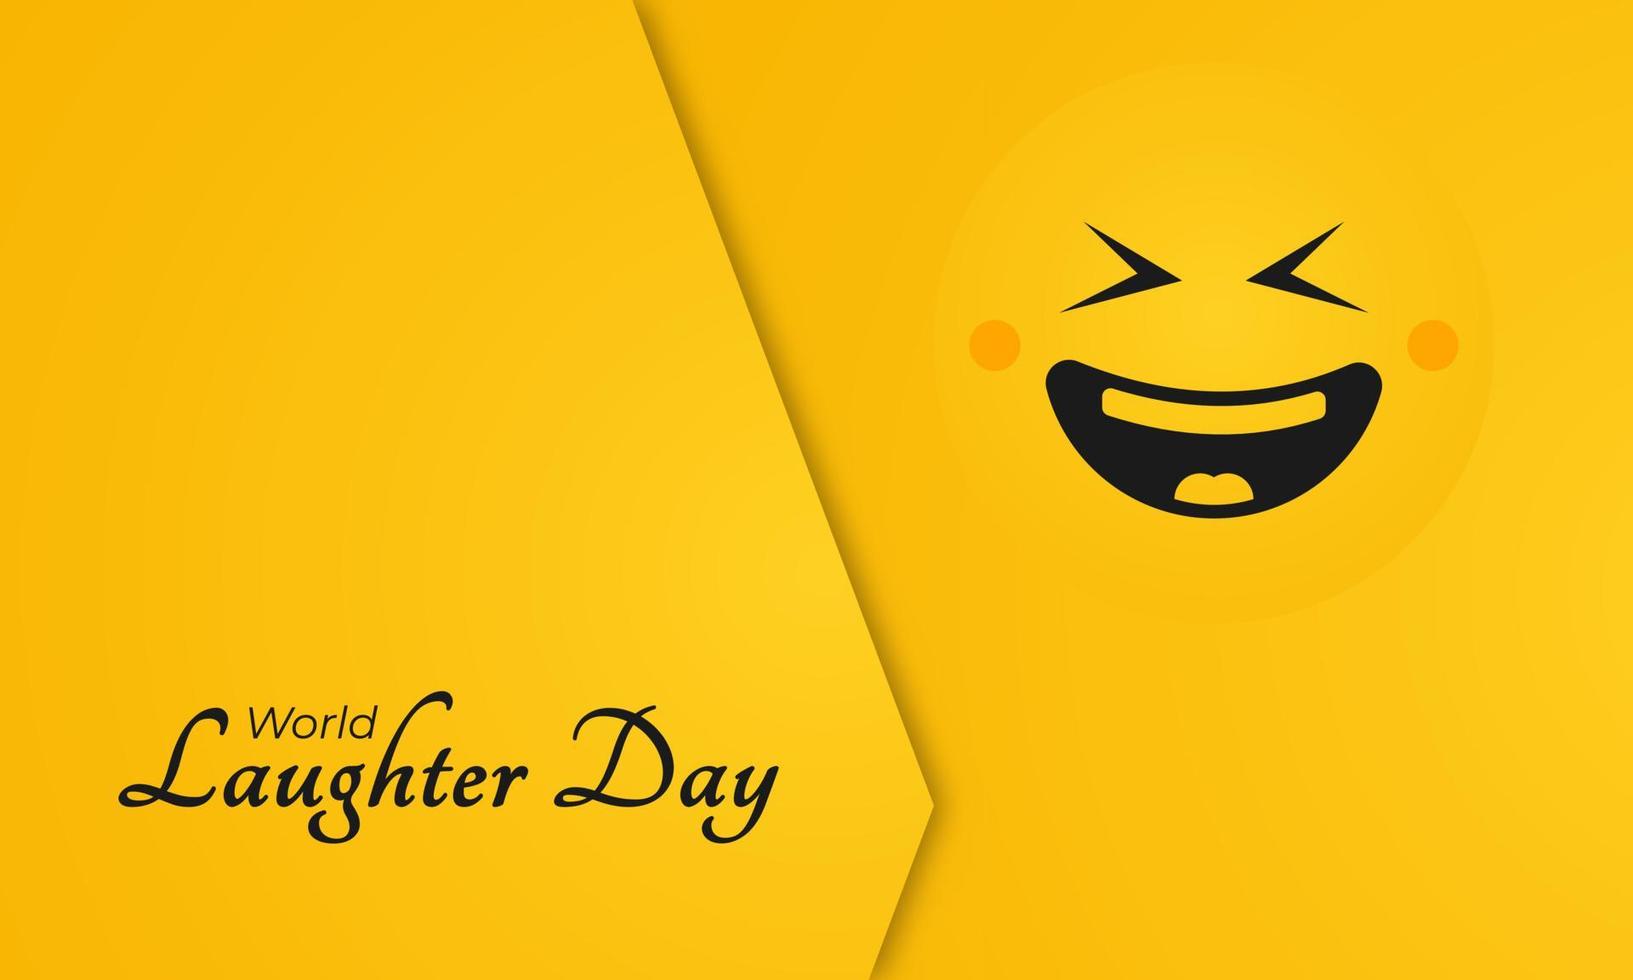 World Laughter Day Greeting Card Banner for Background With Smiley Emoticon Illustration vector